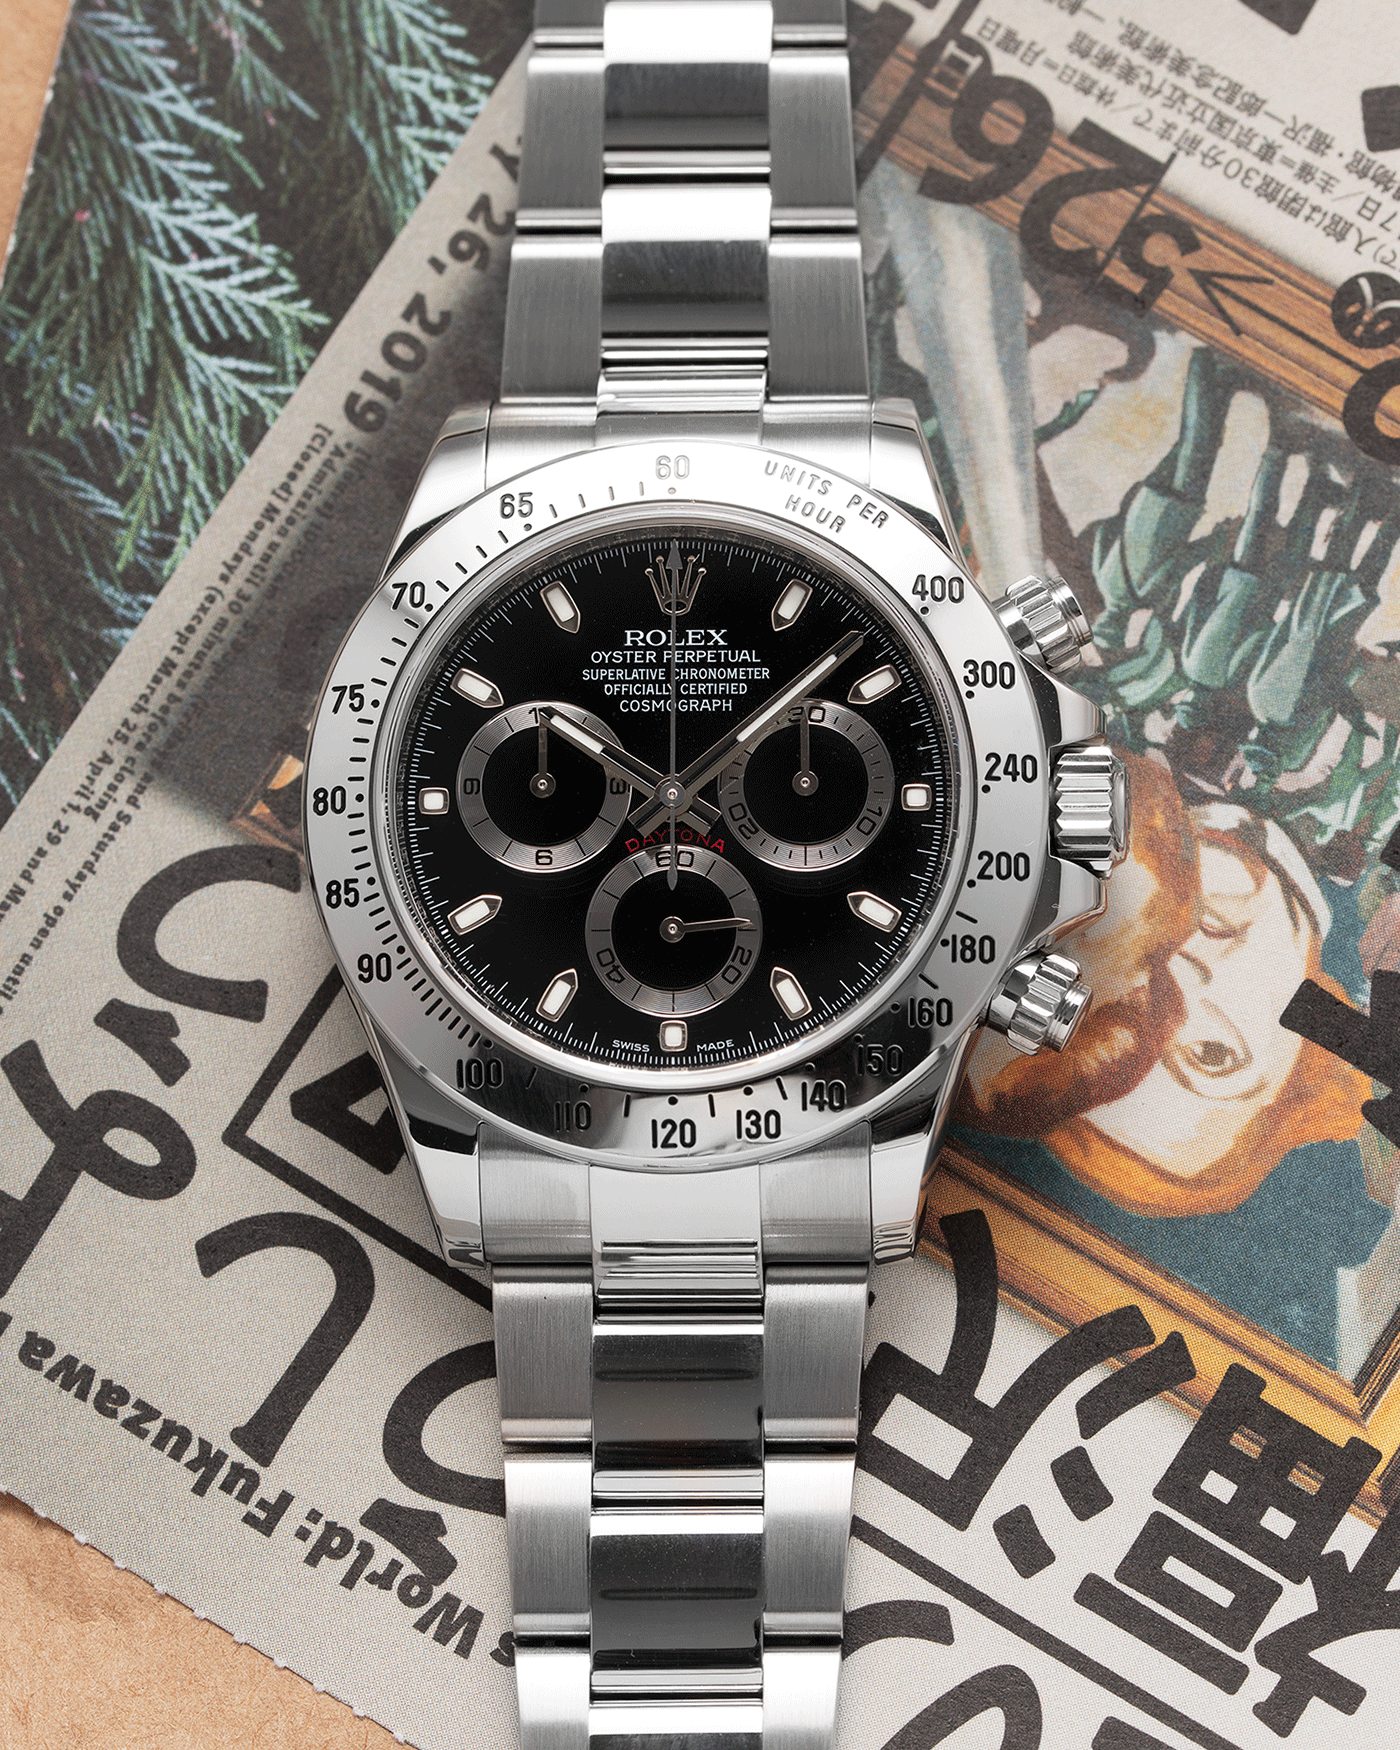 Rolex Cosmograph Daytona 116520 Chronograph Watch | S.Song Vintage Timepieces 